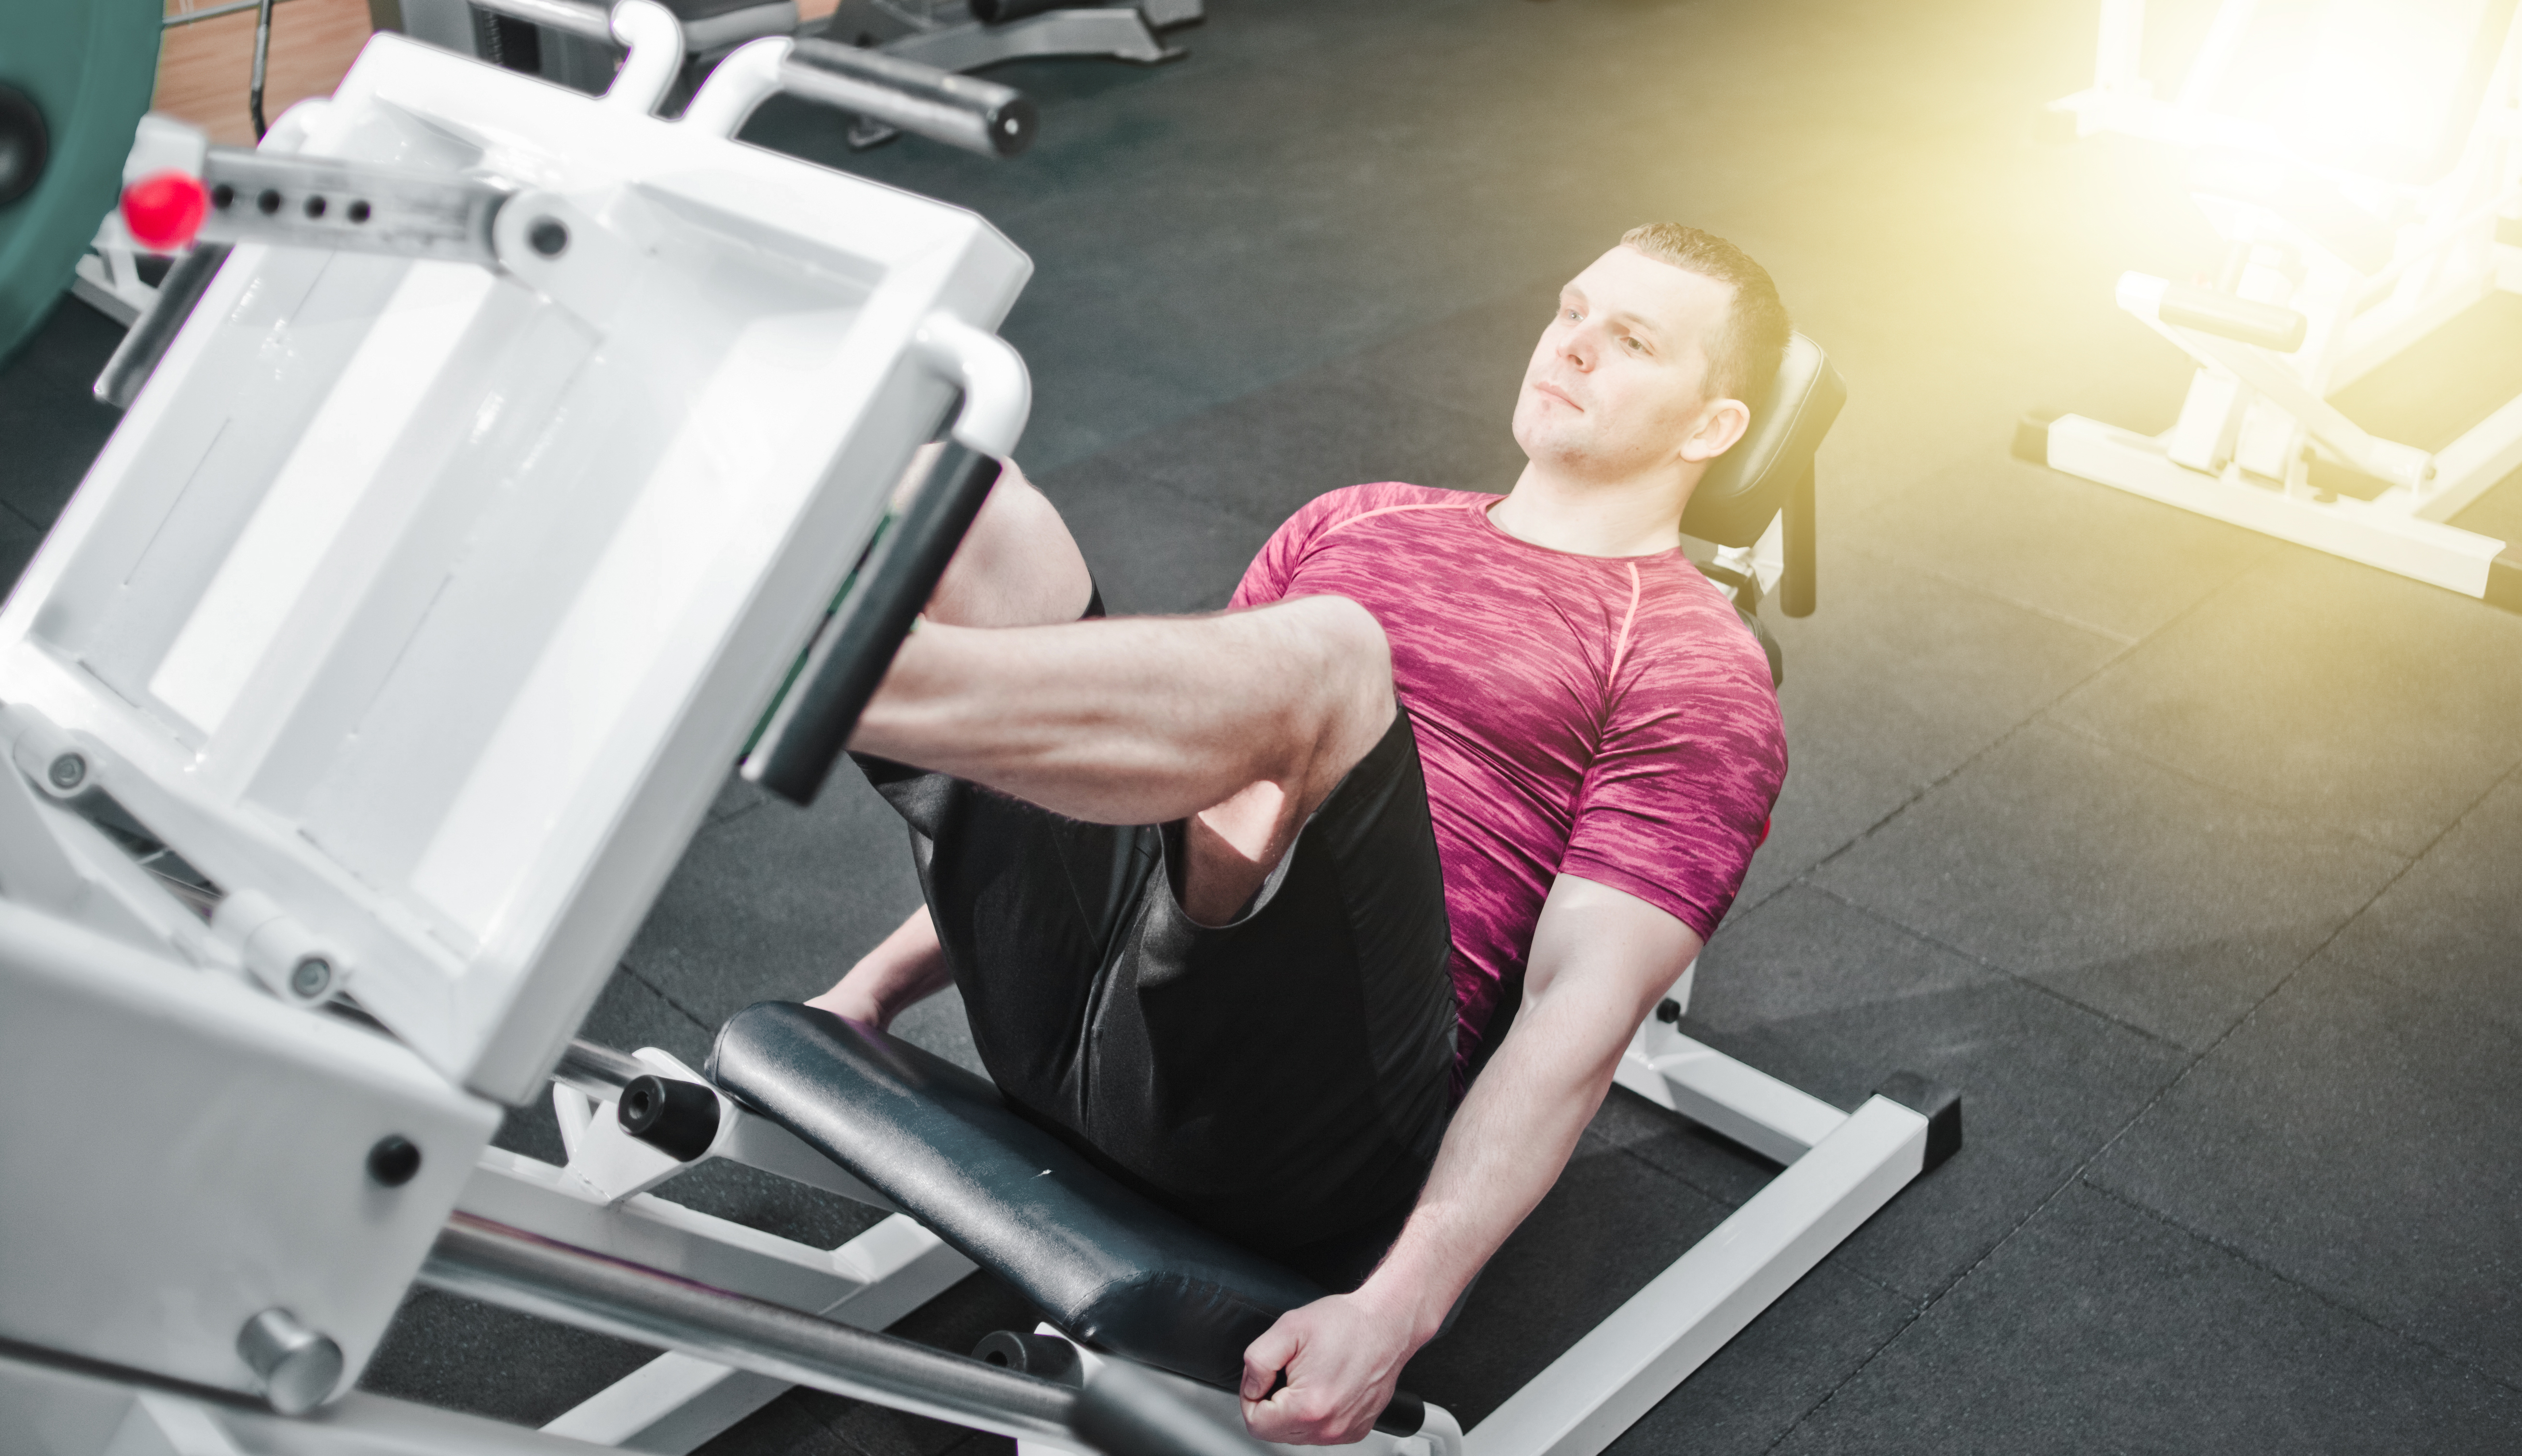 How To Use The Seated Leg Press Machine